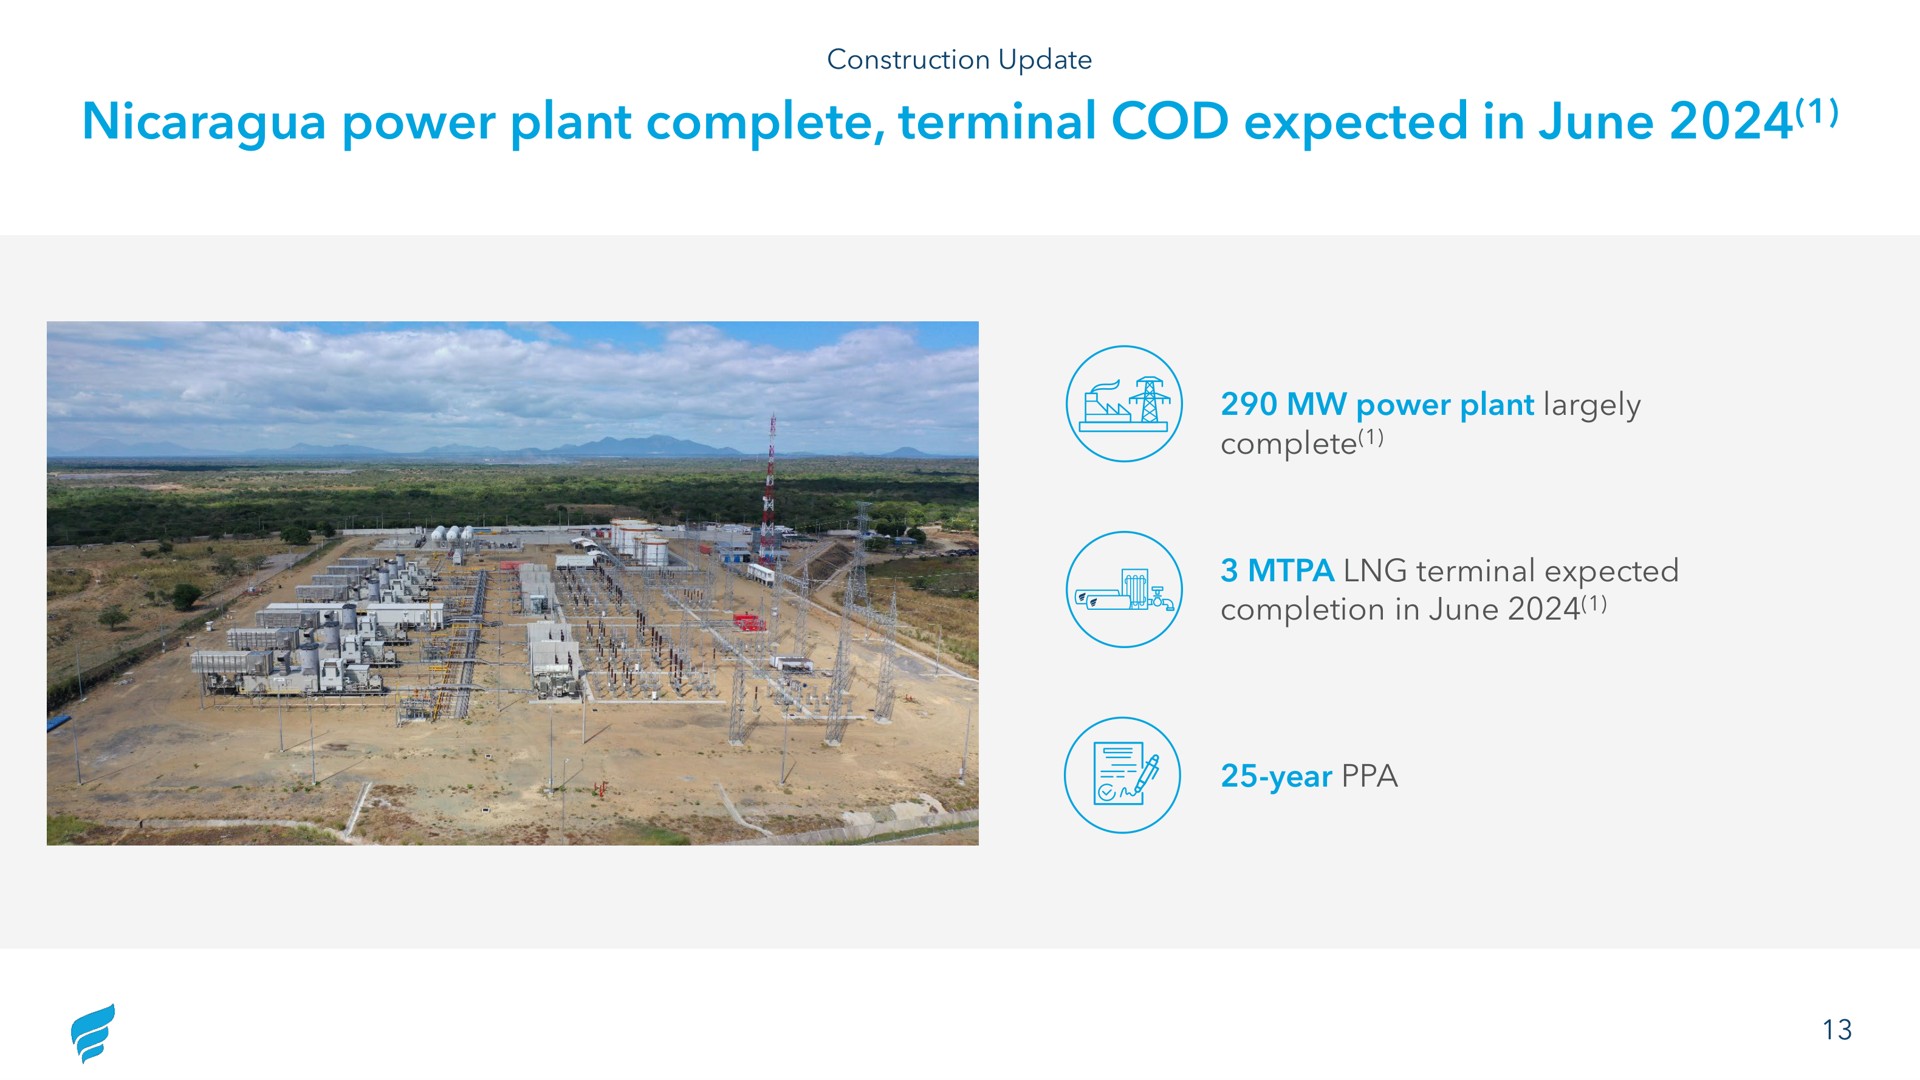 power plant complete terminal cod expected in june power plant largely complete terminal expected completion in june year | NewFortress Energy